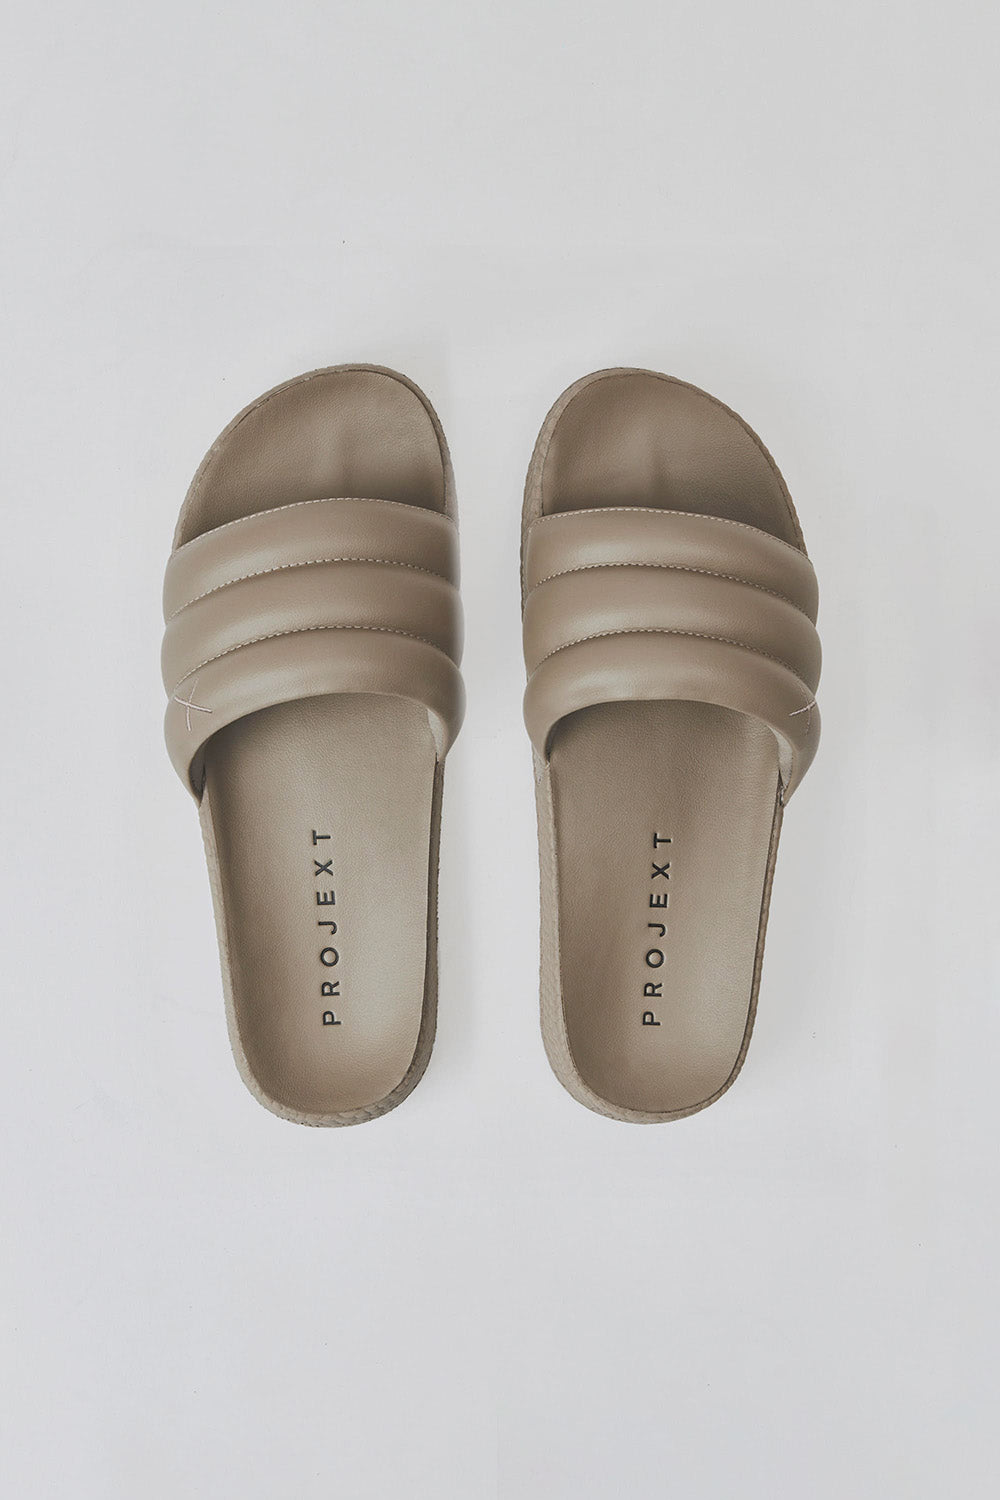 » Scooter Slides Taupe Women (Discount)